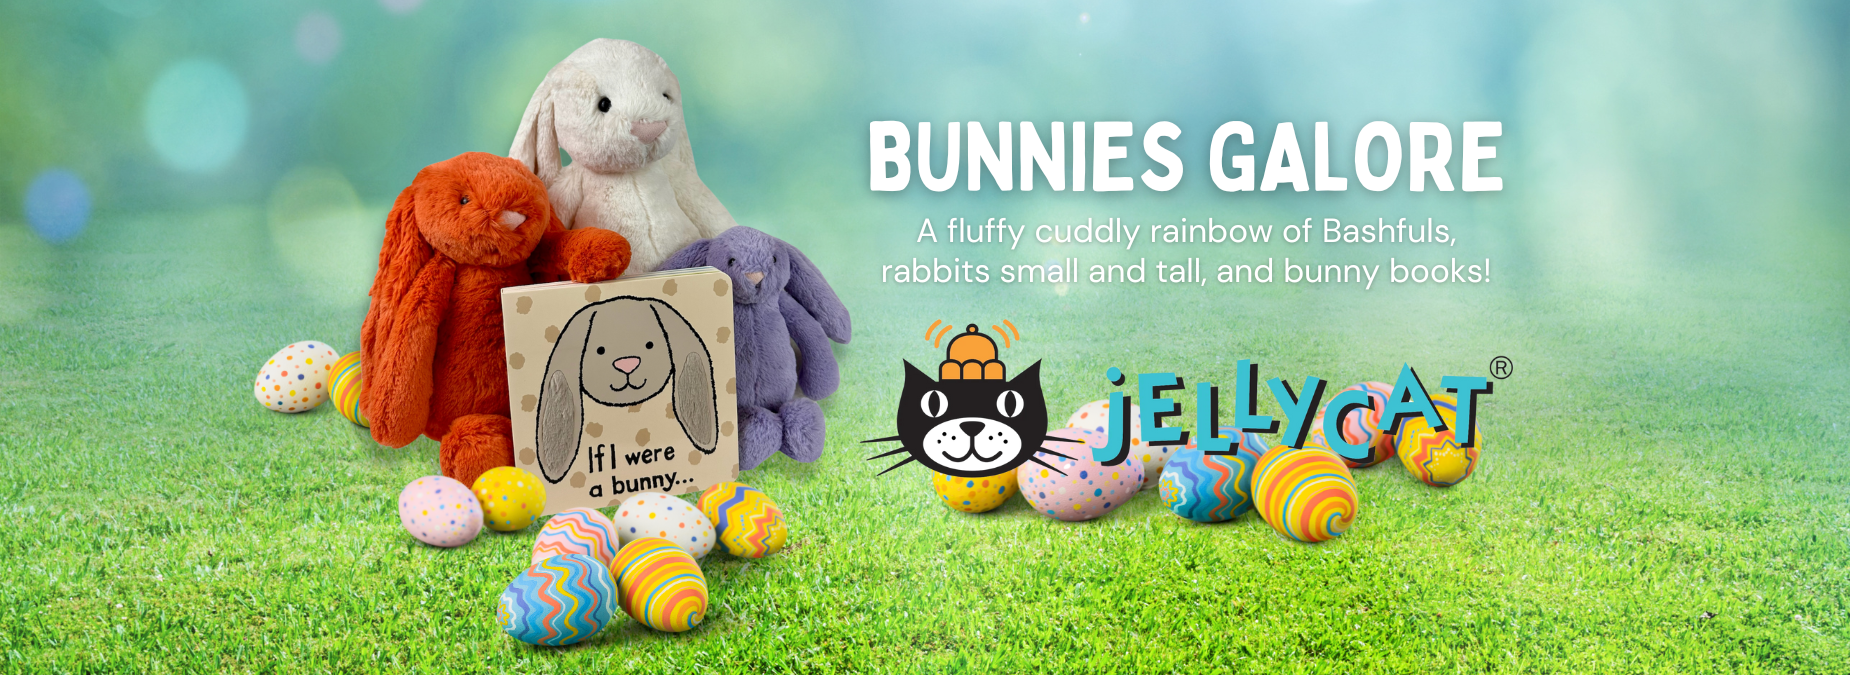 Bunnies Galore - A fluffy cuddly rainbow of Bashfuls, rabbits small and tall, and bunny books! - Jellycat